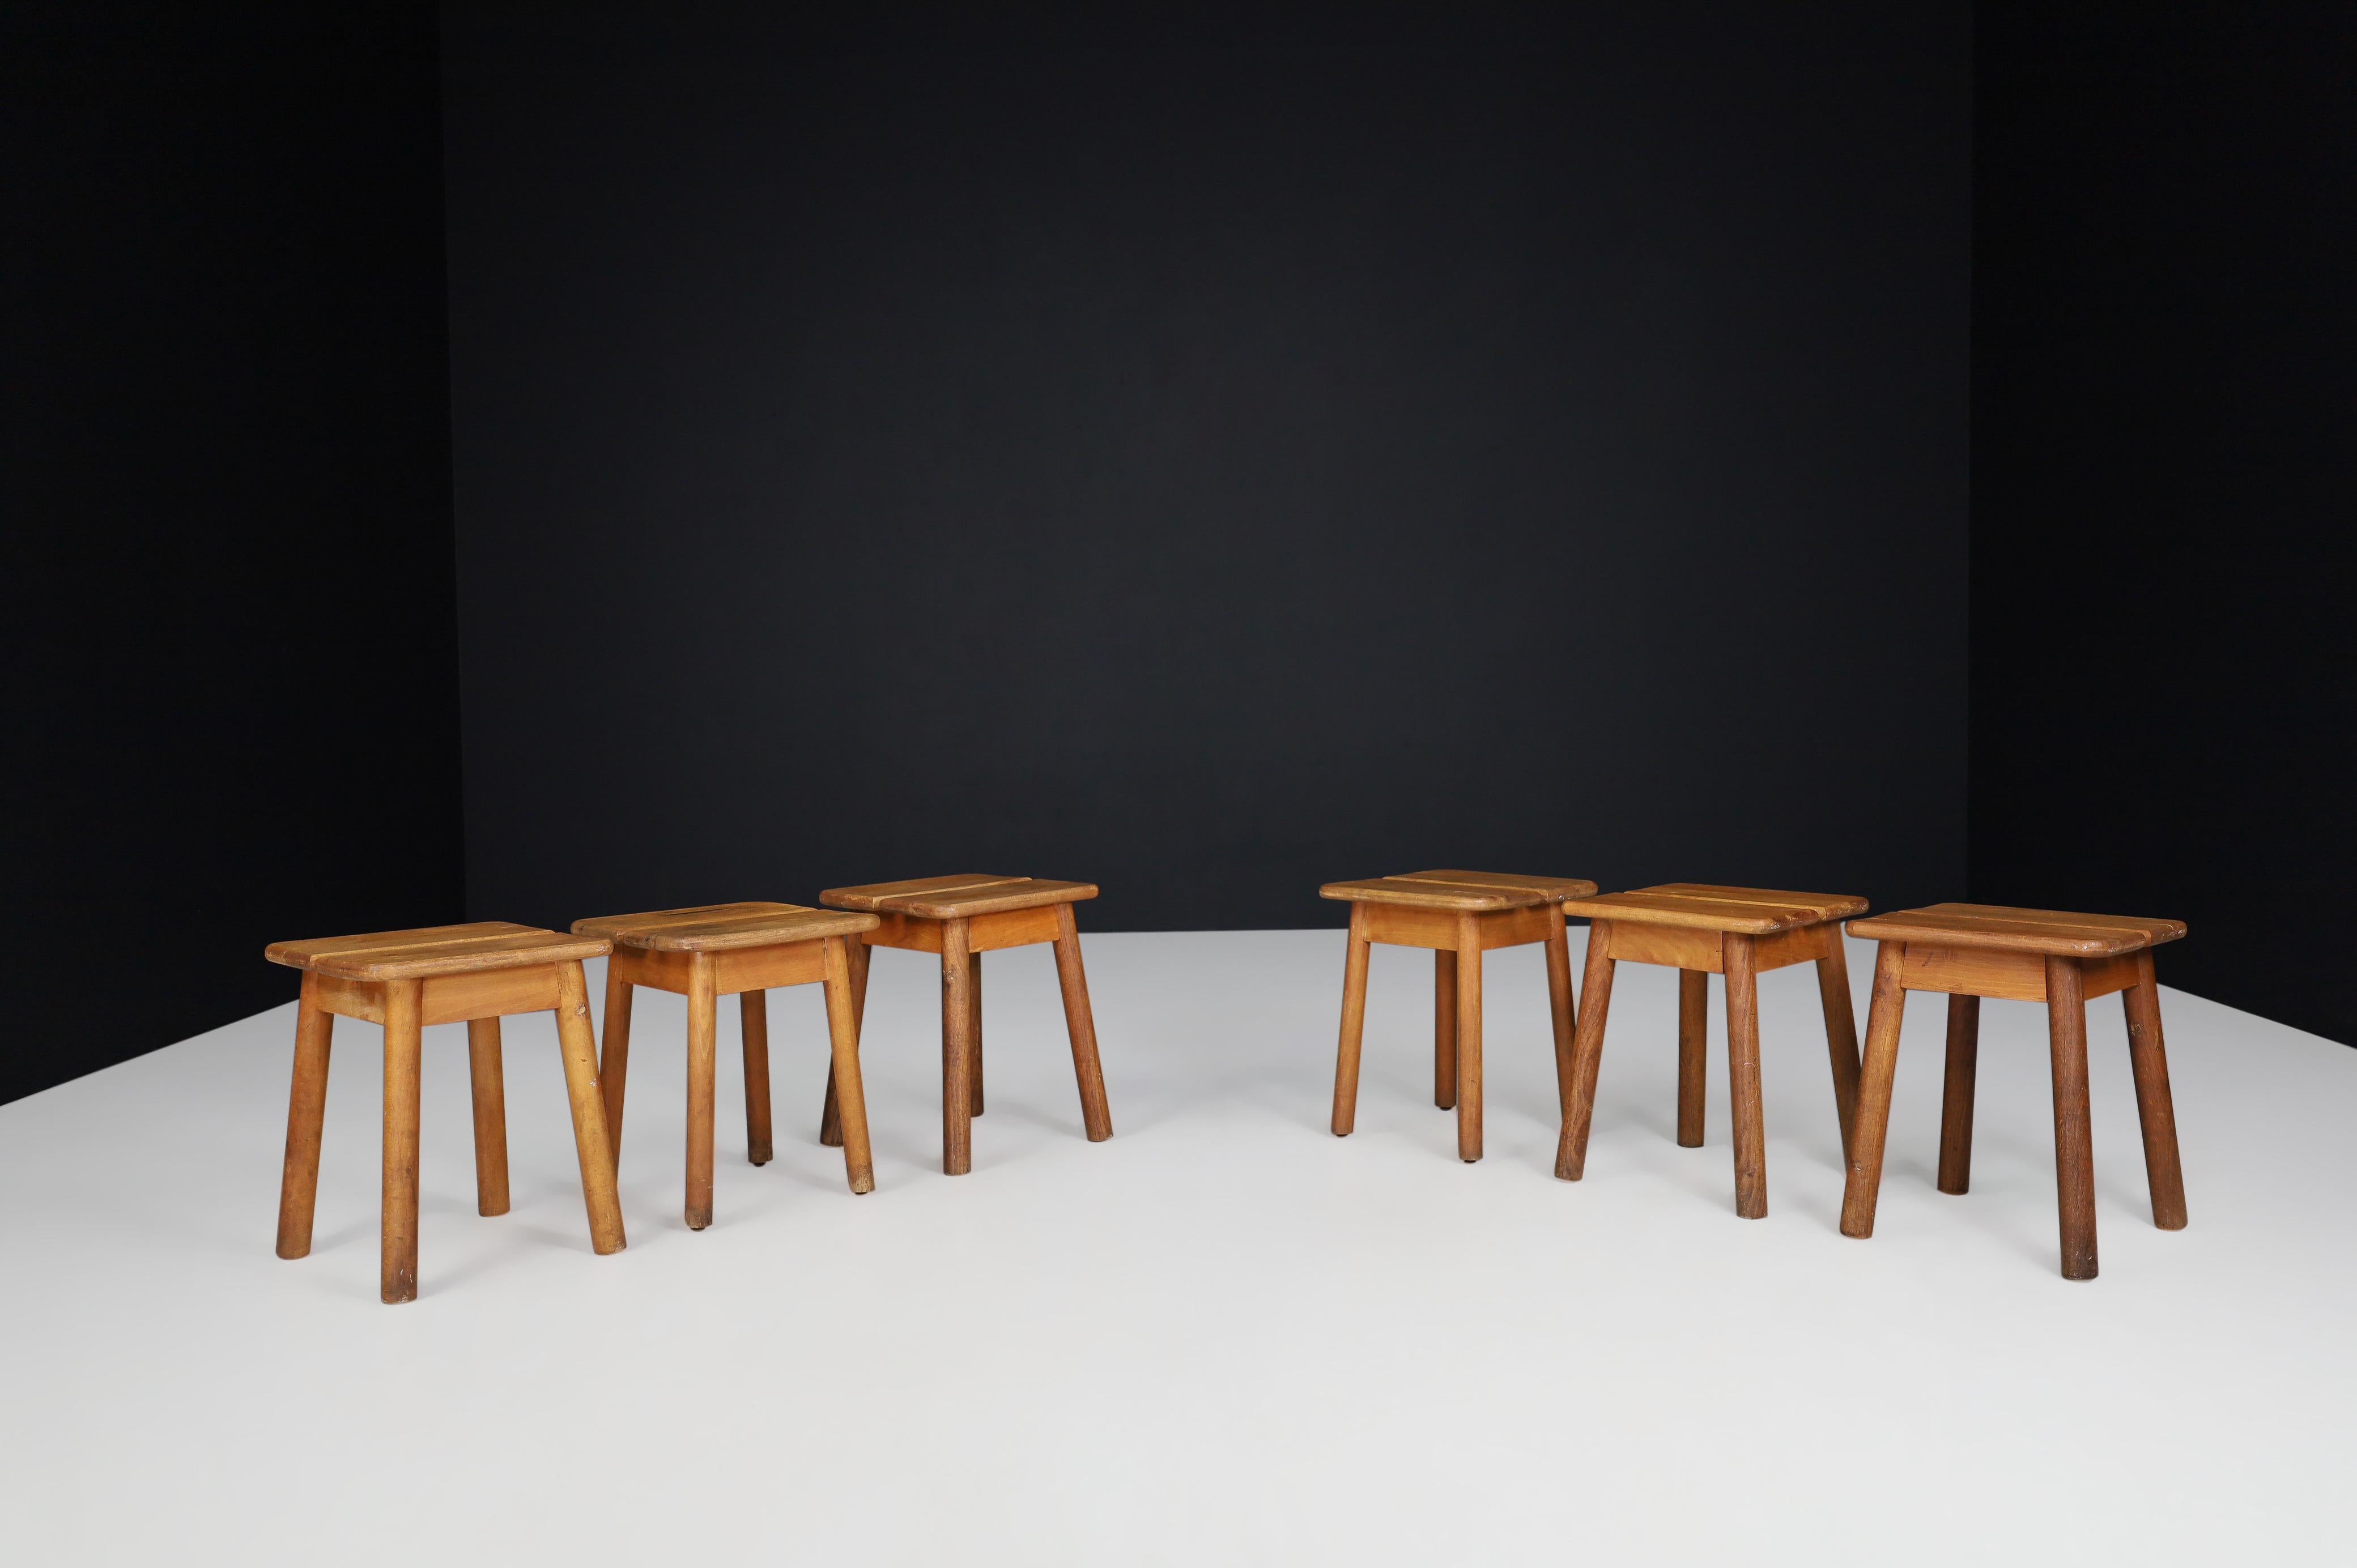 Pierre Gautier Solid Beech Tabourets, France 1960s

Pierre Gautier designed these stools- in the 1960s for the publisher Vergneres. These subtle and modest stools are executed in stained beechwood. Characteristics of these Tabourets are the nice